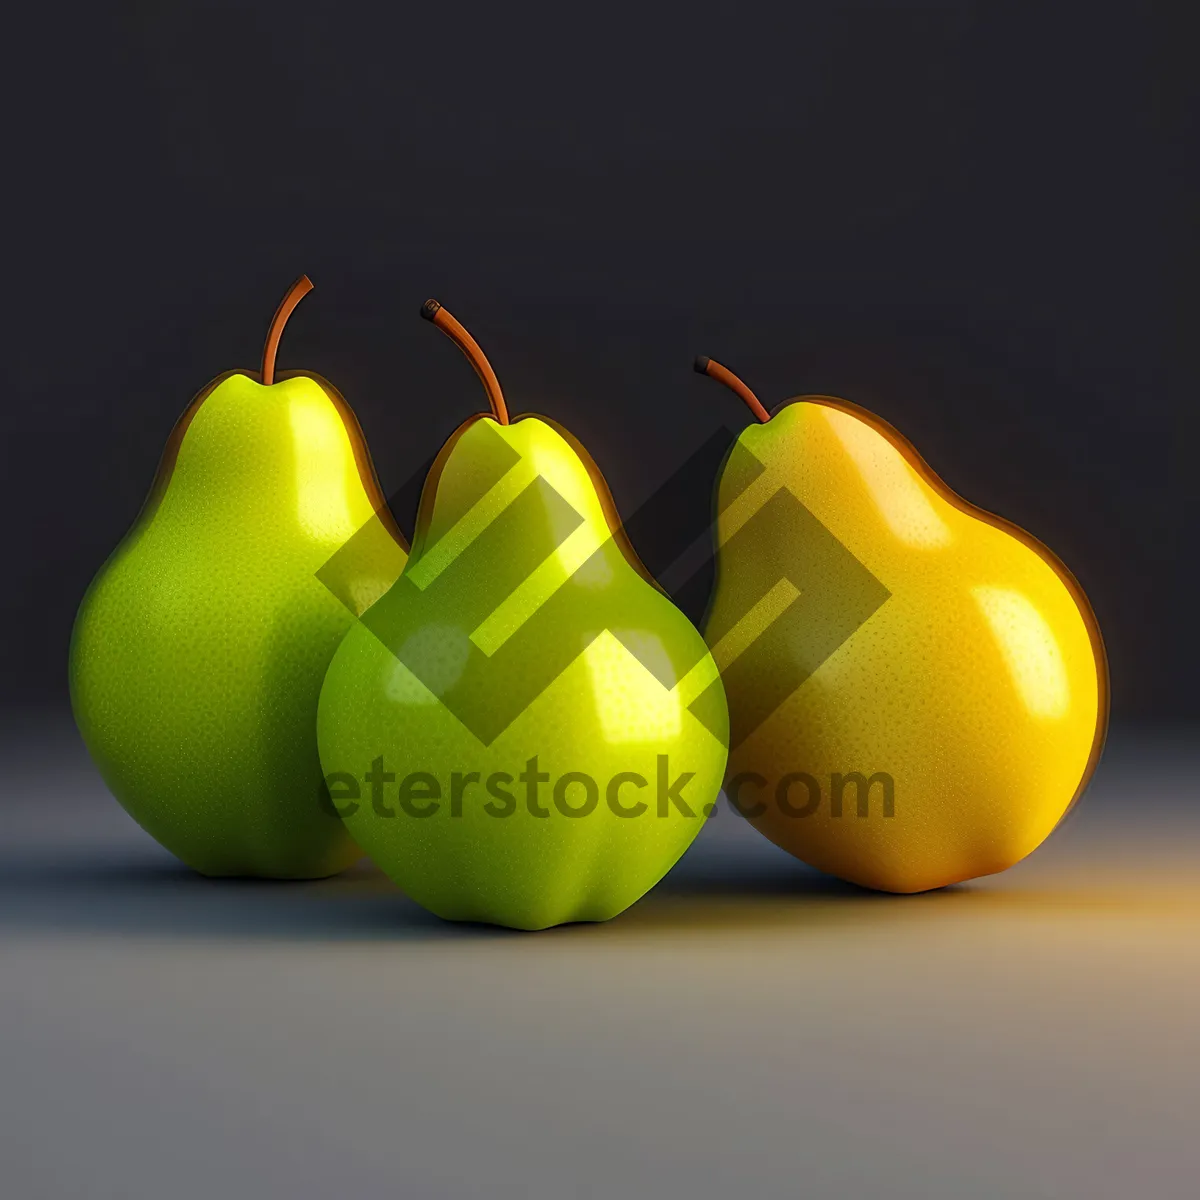 Picture of Refreshing Citrus Pear: A Juicy and Healthy Fruit Delight